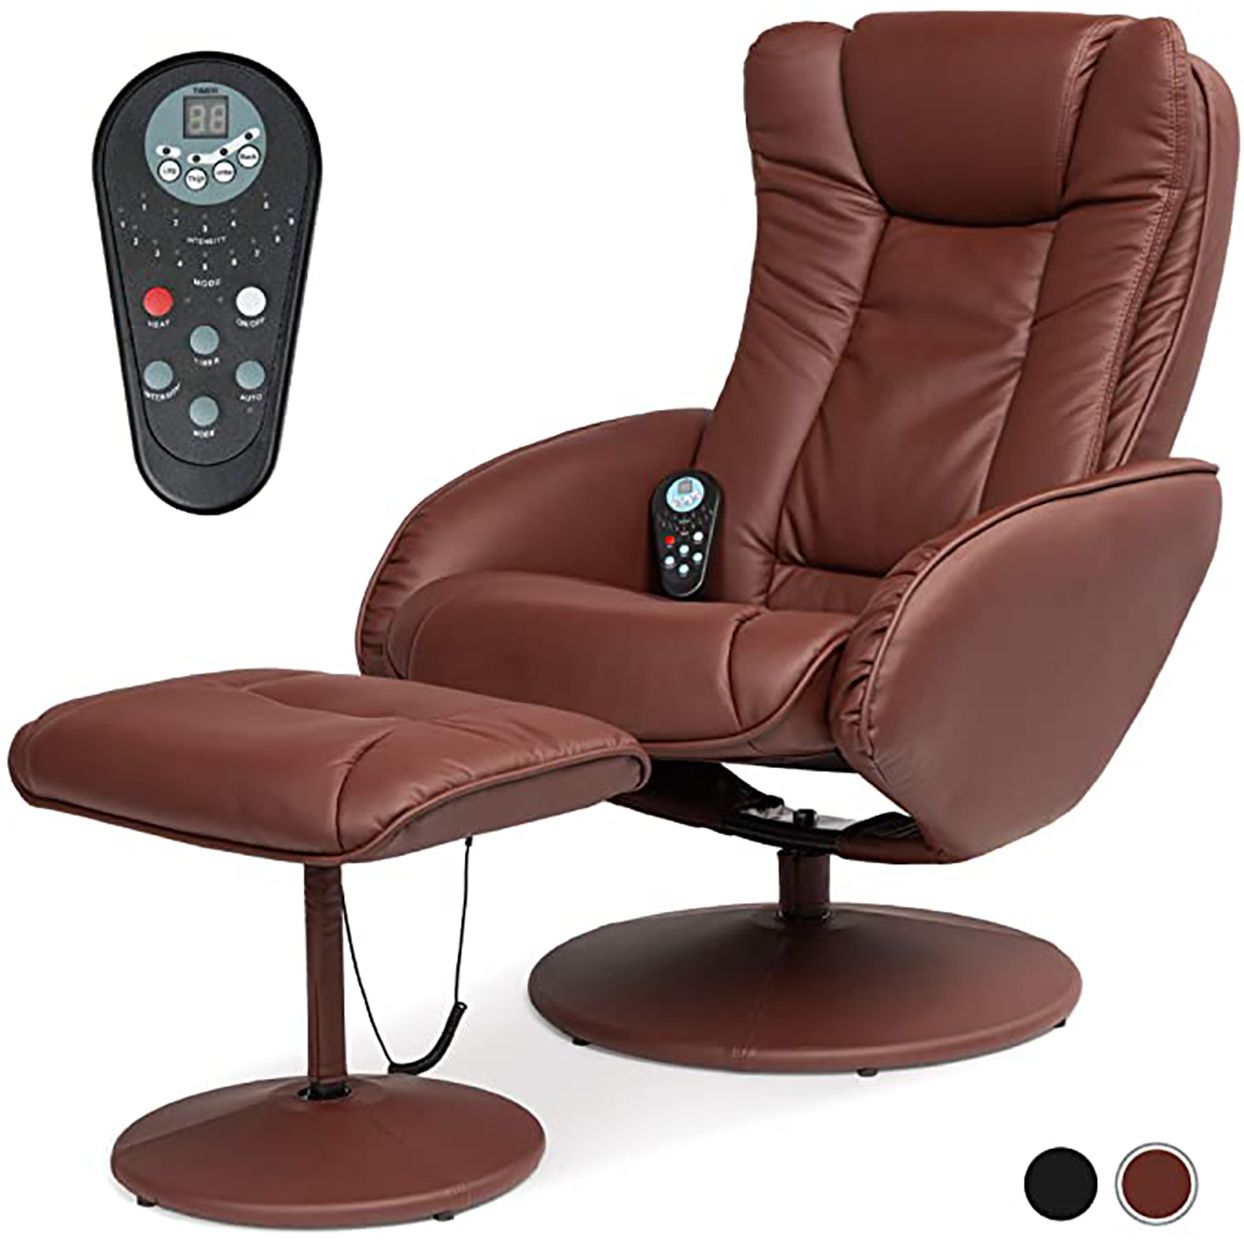 massage chair best products